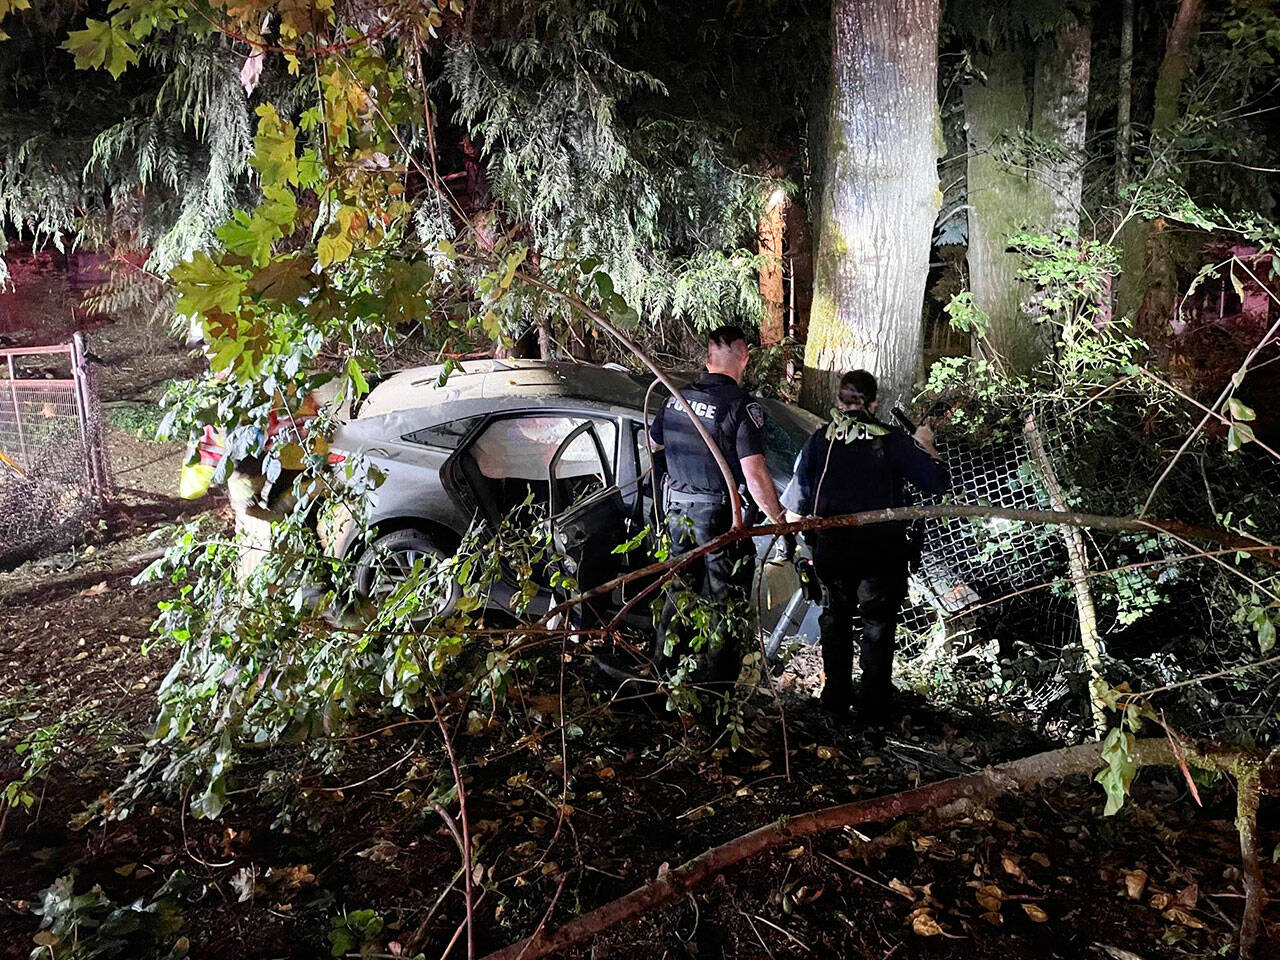 A car occupied by three juveniles crashed into a tree Aug. 29 in Black Diamond. The driver died from injuries in the crash. COURTESY PHOTO, Puget Sound Fire